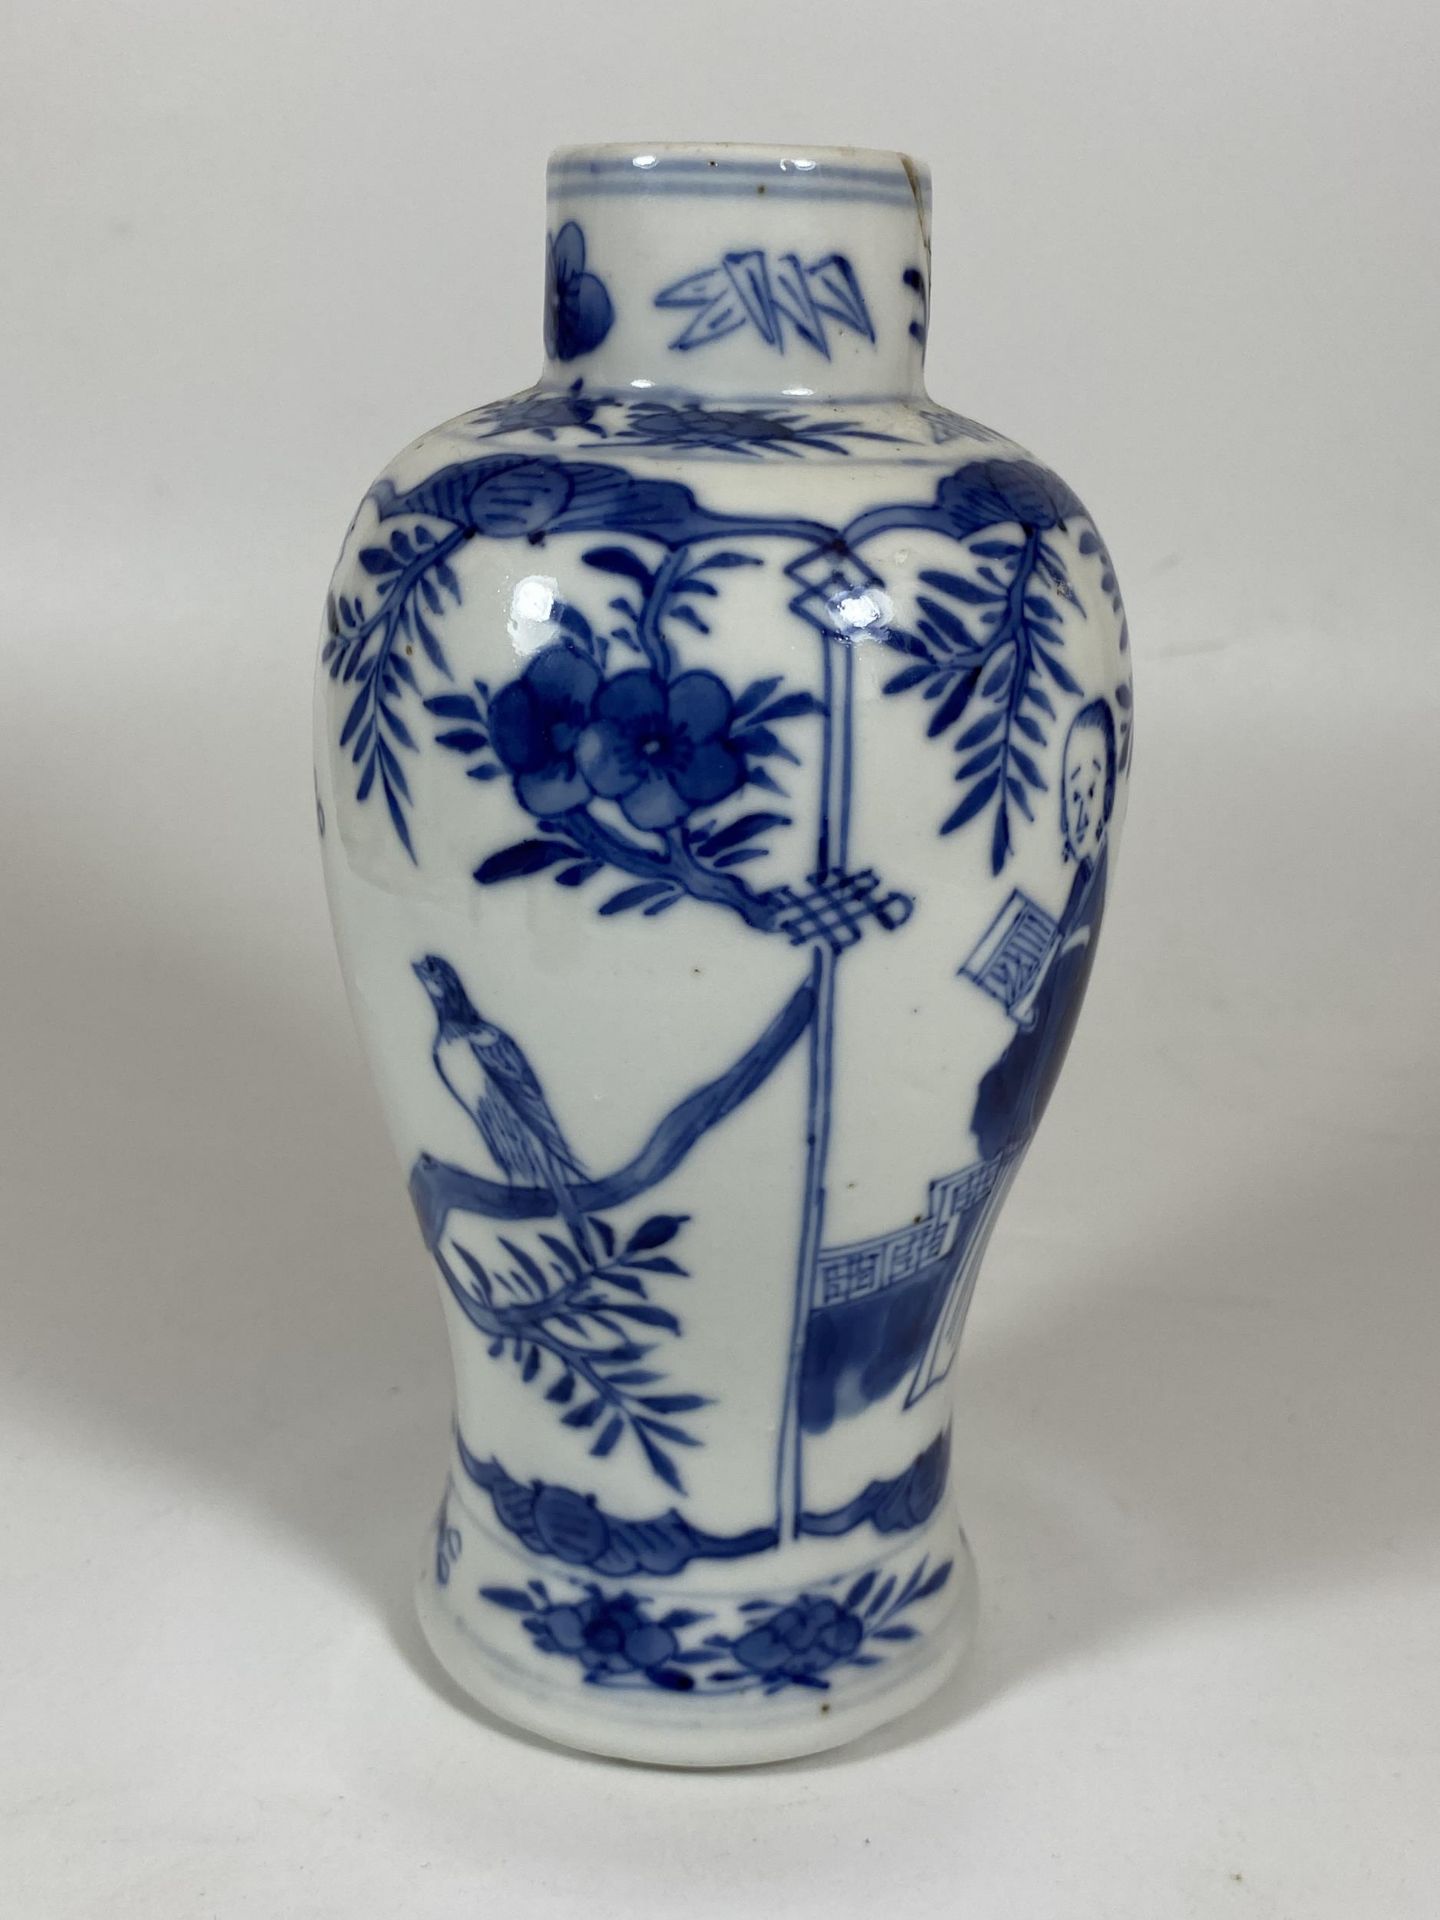 A LATE 19TH CENTURY CHINESE KANGXI STYLE BLUE AND WHITE FIGURAL DESIGN VASE, HEIGHT 18CM - Image 2 of 6